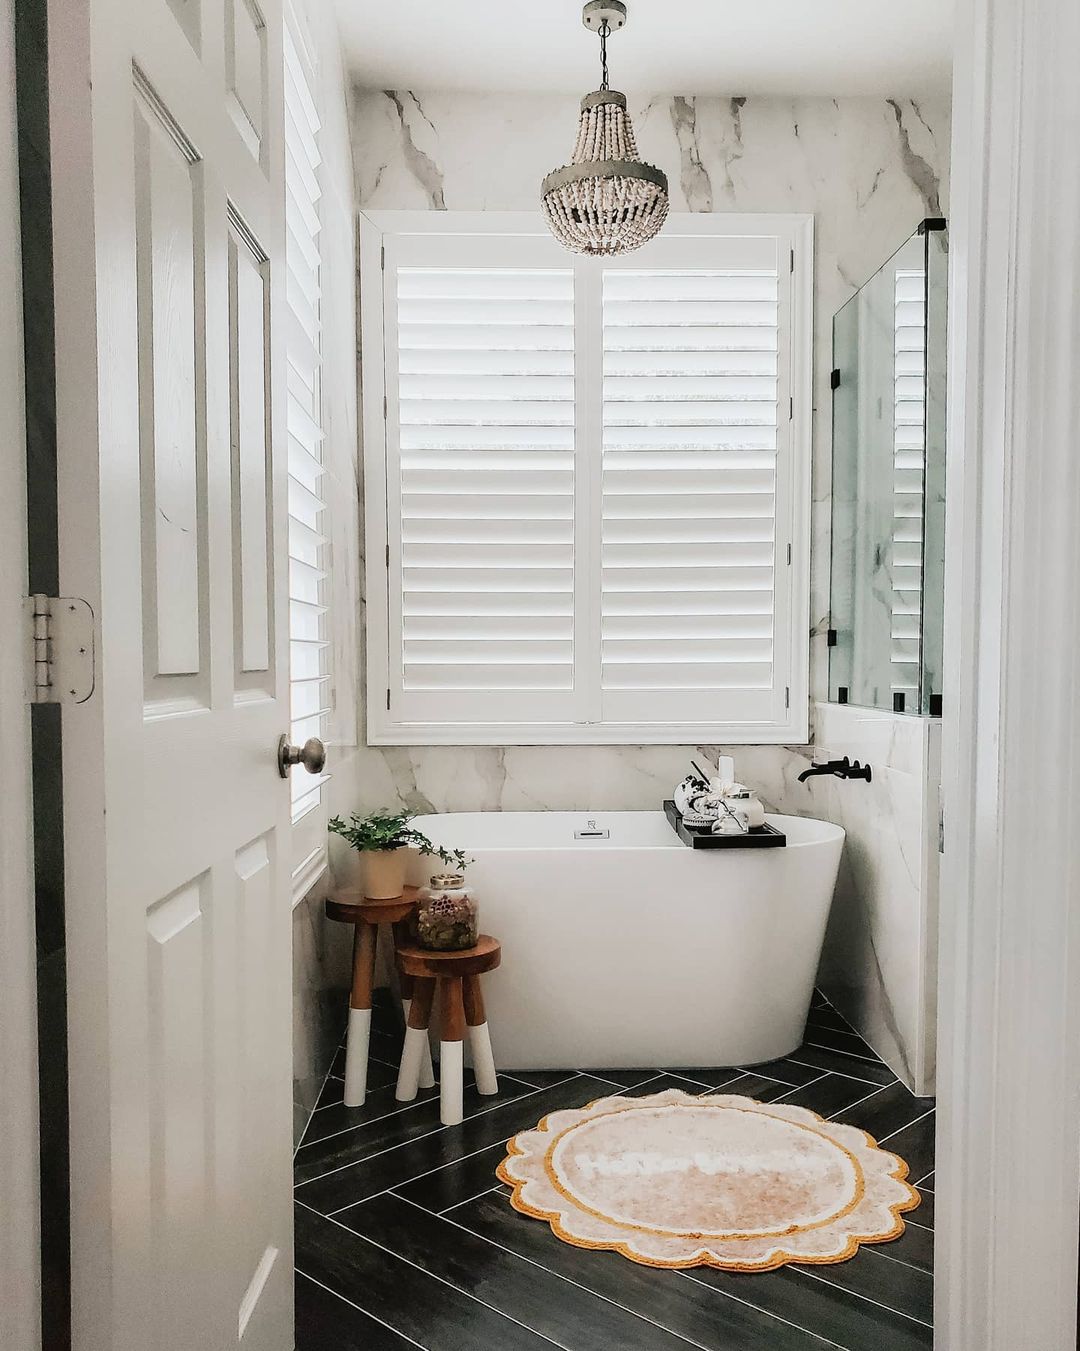 Style Your Bath with a Chic and Compact Tray